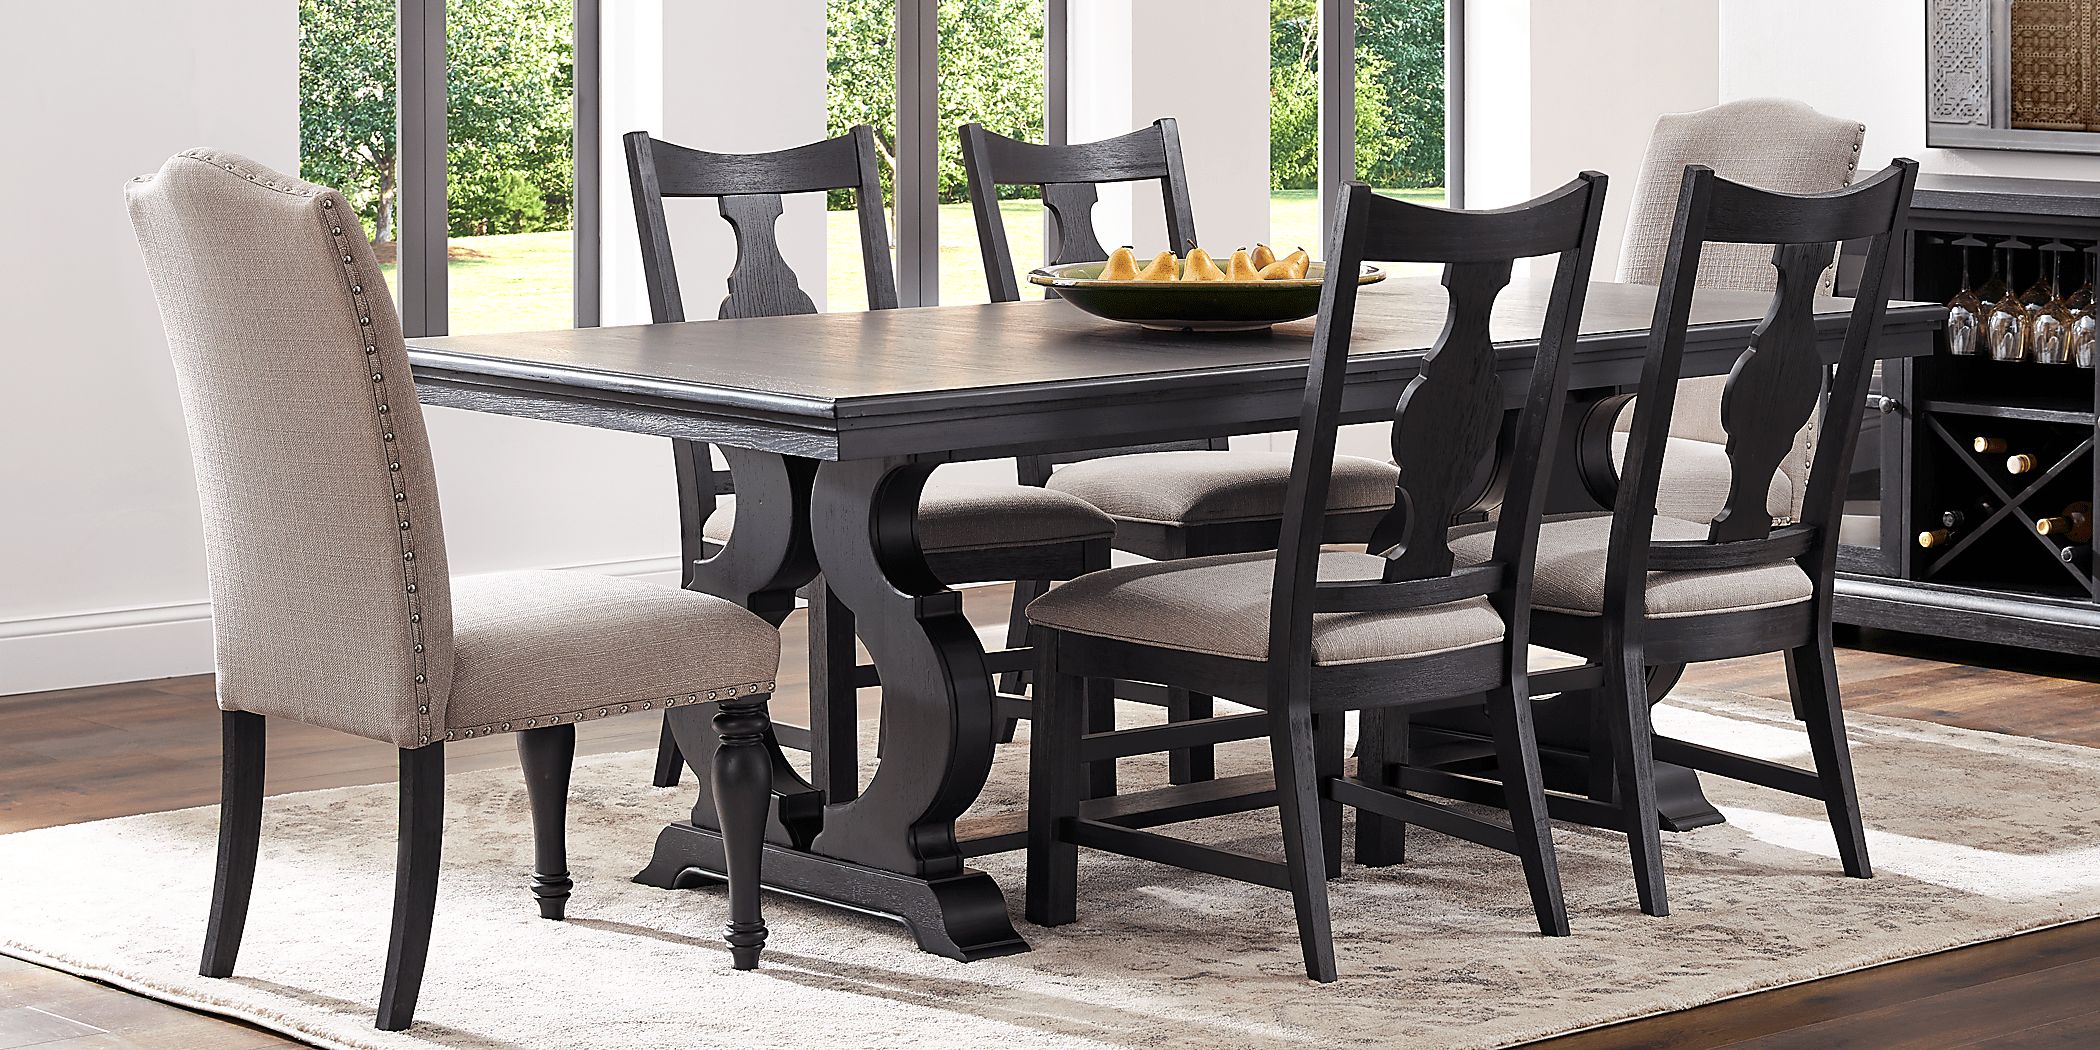 Rooms To Go Sillsbee Place Black 7 Pc Rectangle Dining Room with Wood Back Chairs